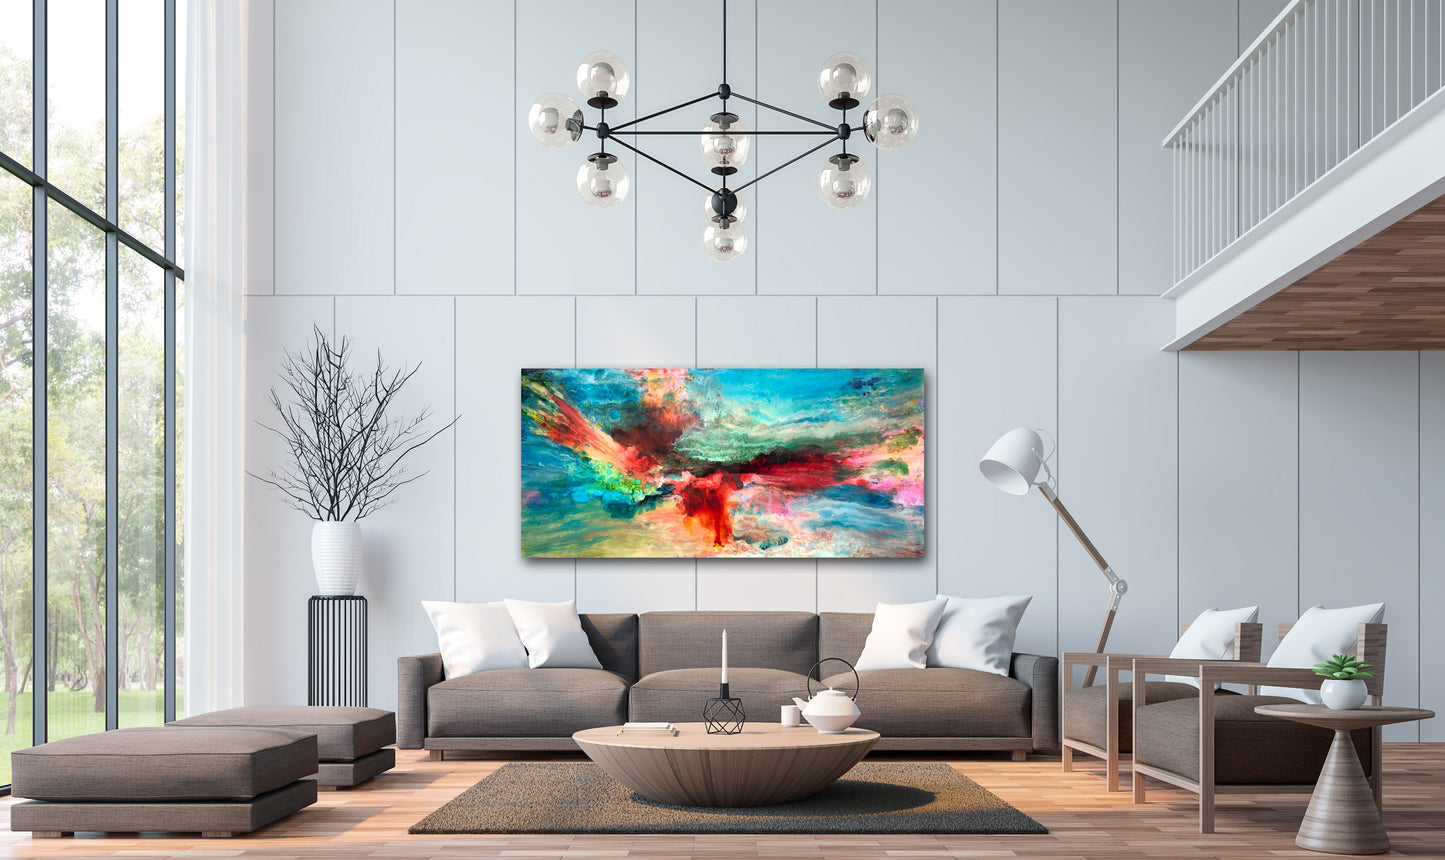 Synthesized 36" X 72" - SOLD